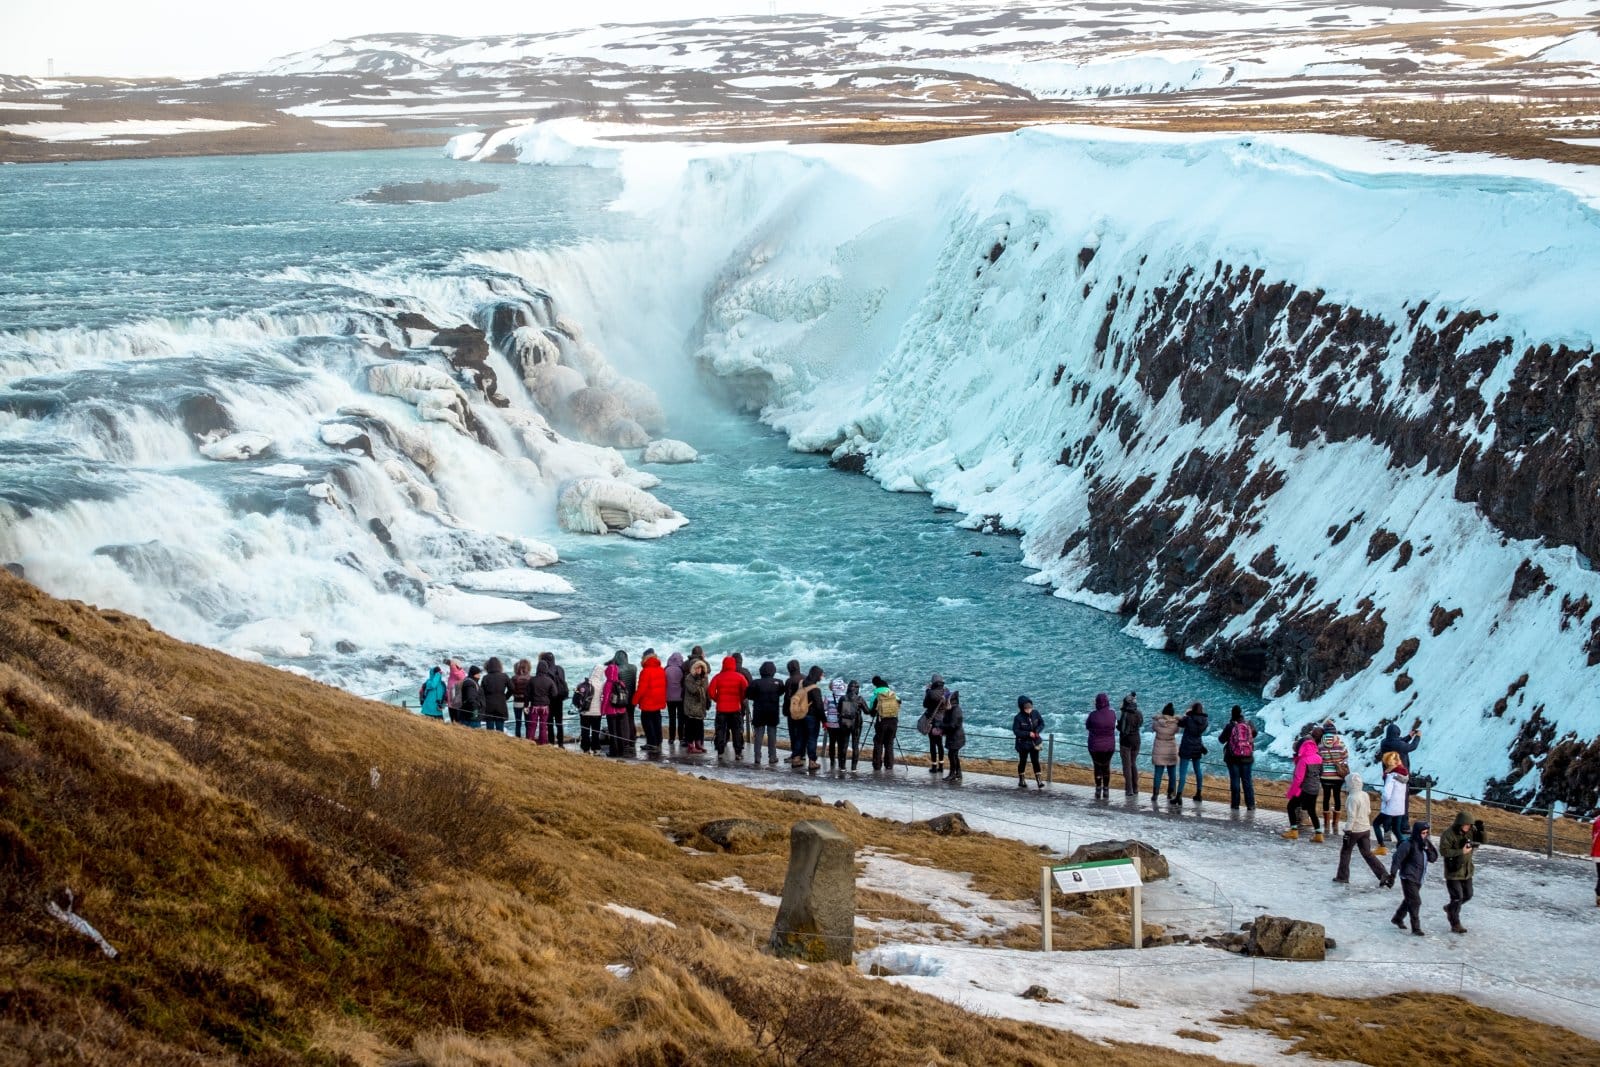 <p class="wp-caption-text">Image Credit: Shutterstock / lenggirl</p>  <p><span>Gullfoss, or “Golden Falls,” is a stunning waterfall in the canyon of the Hvítá River in southwest Iceland. Part of the famous Golden Circle route, Gullfoss is known for its immense power and beauty, cascading down in two stages into a deep crevice hidden from view, creating an awe-inspiring spectacle. The waterfall’s surrounding landscapes are equally breathtaking, offering panoramic views of Iceland’s rugged terrain.</span></p>